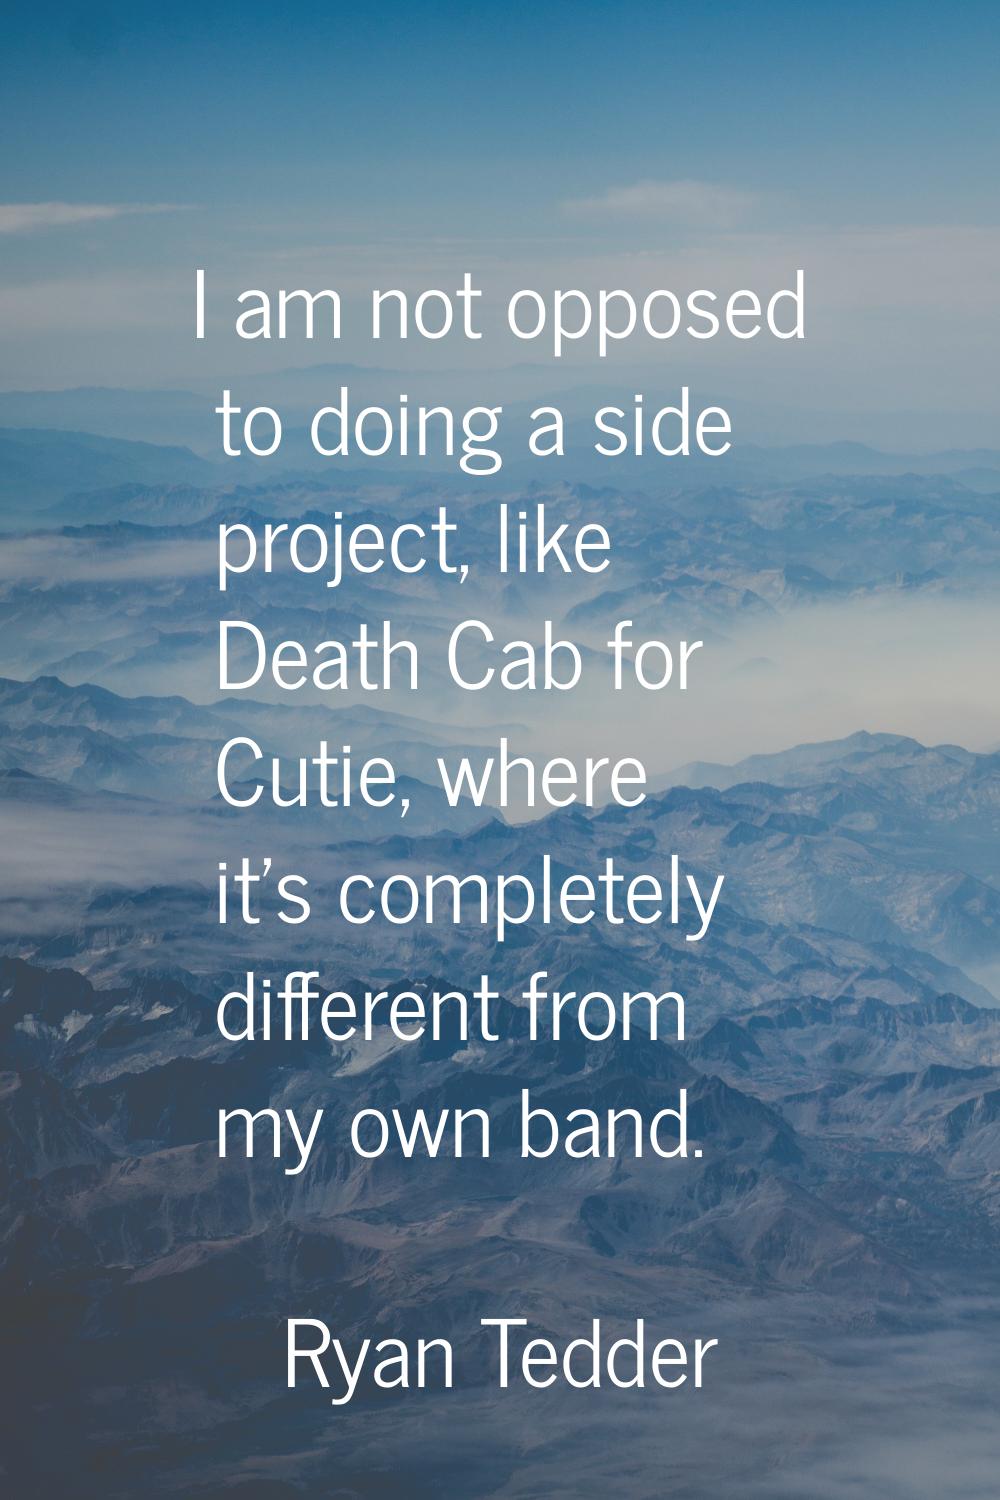 I am not opposed to doing a side project, like Death Cab for Cutie, where it's completely different